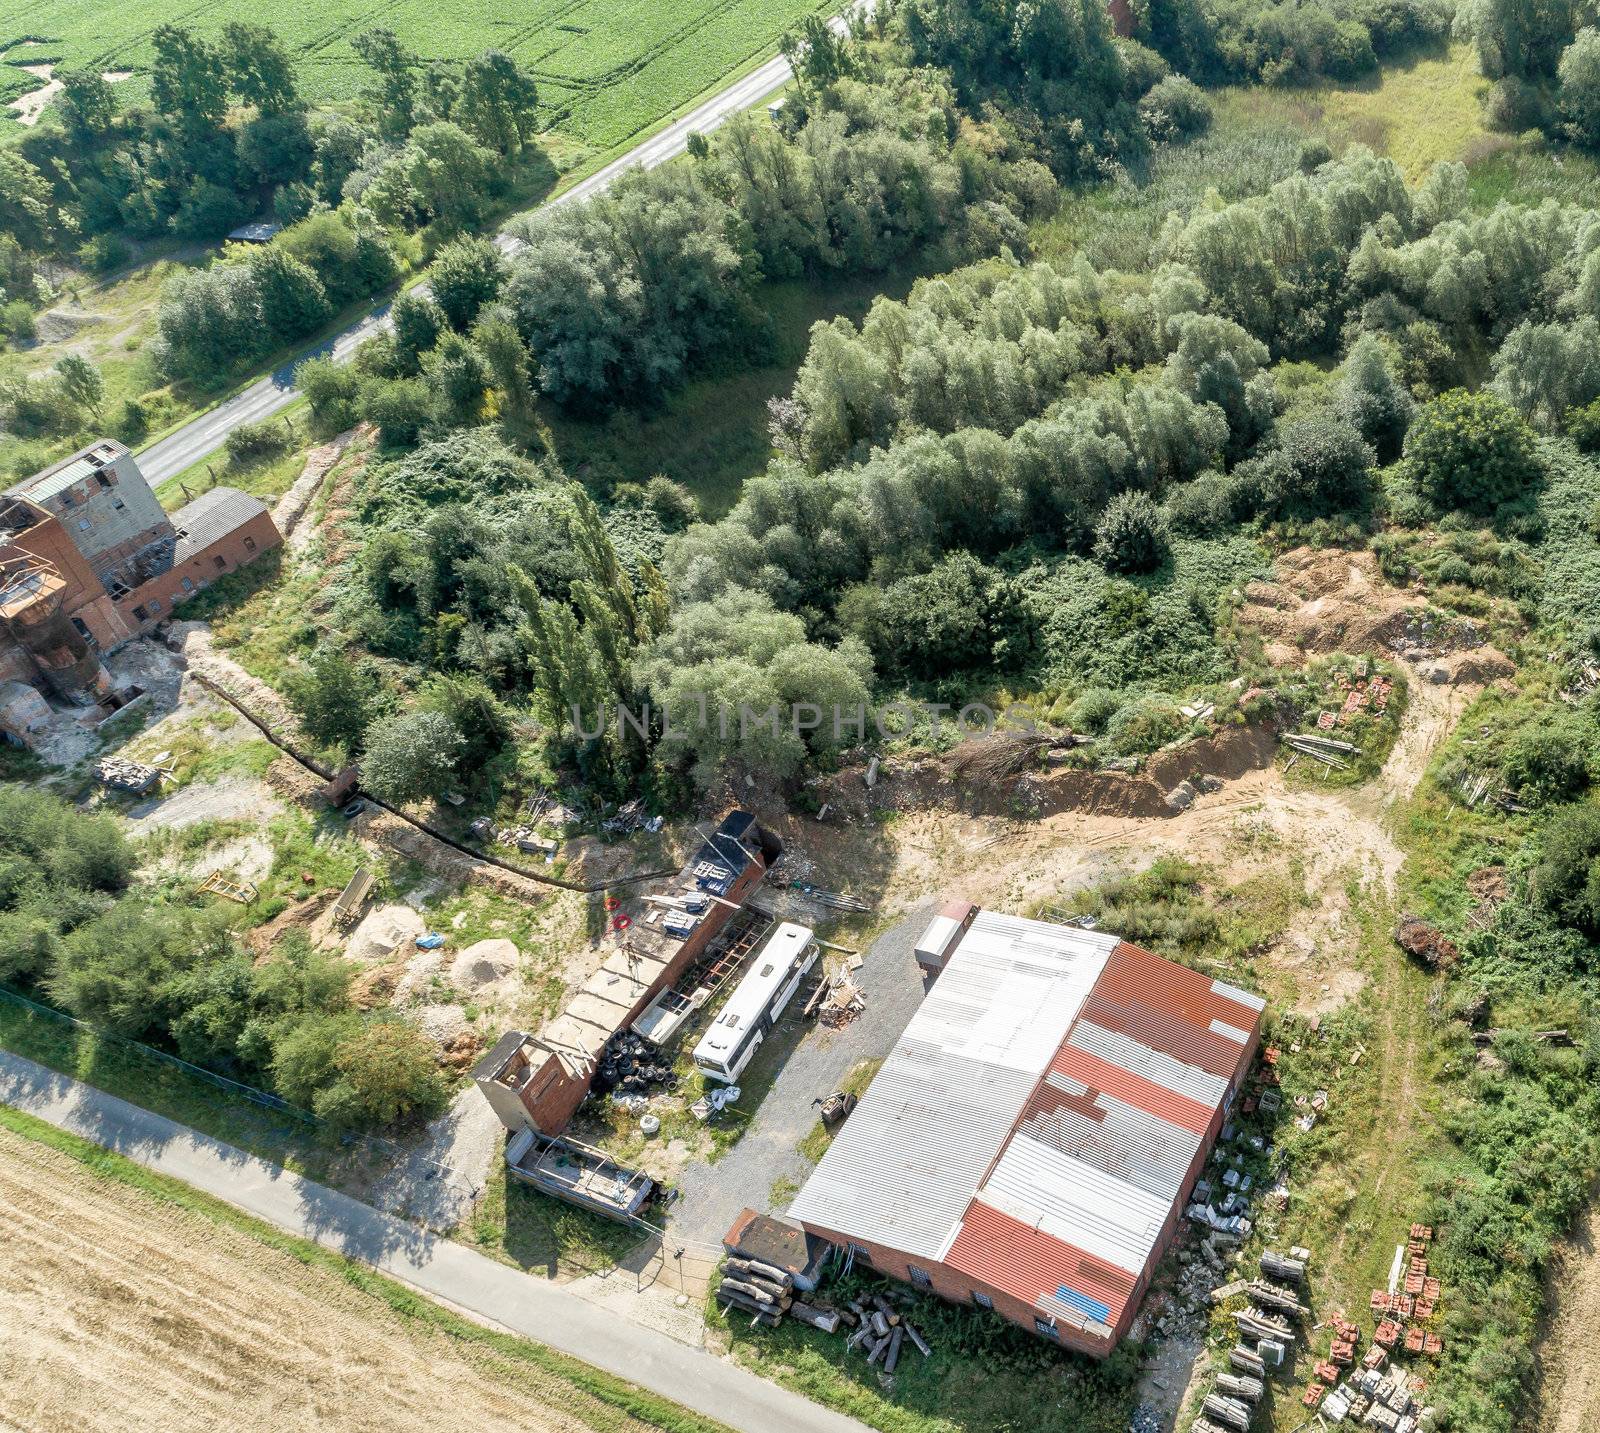 Downsized plant for the repair of machines with a scrap yard behind a forest with a wild dump, diagonally shot aerial photograph. by geogif